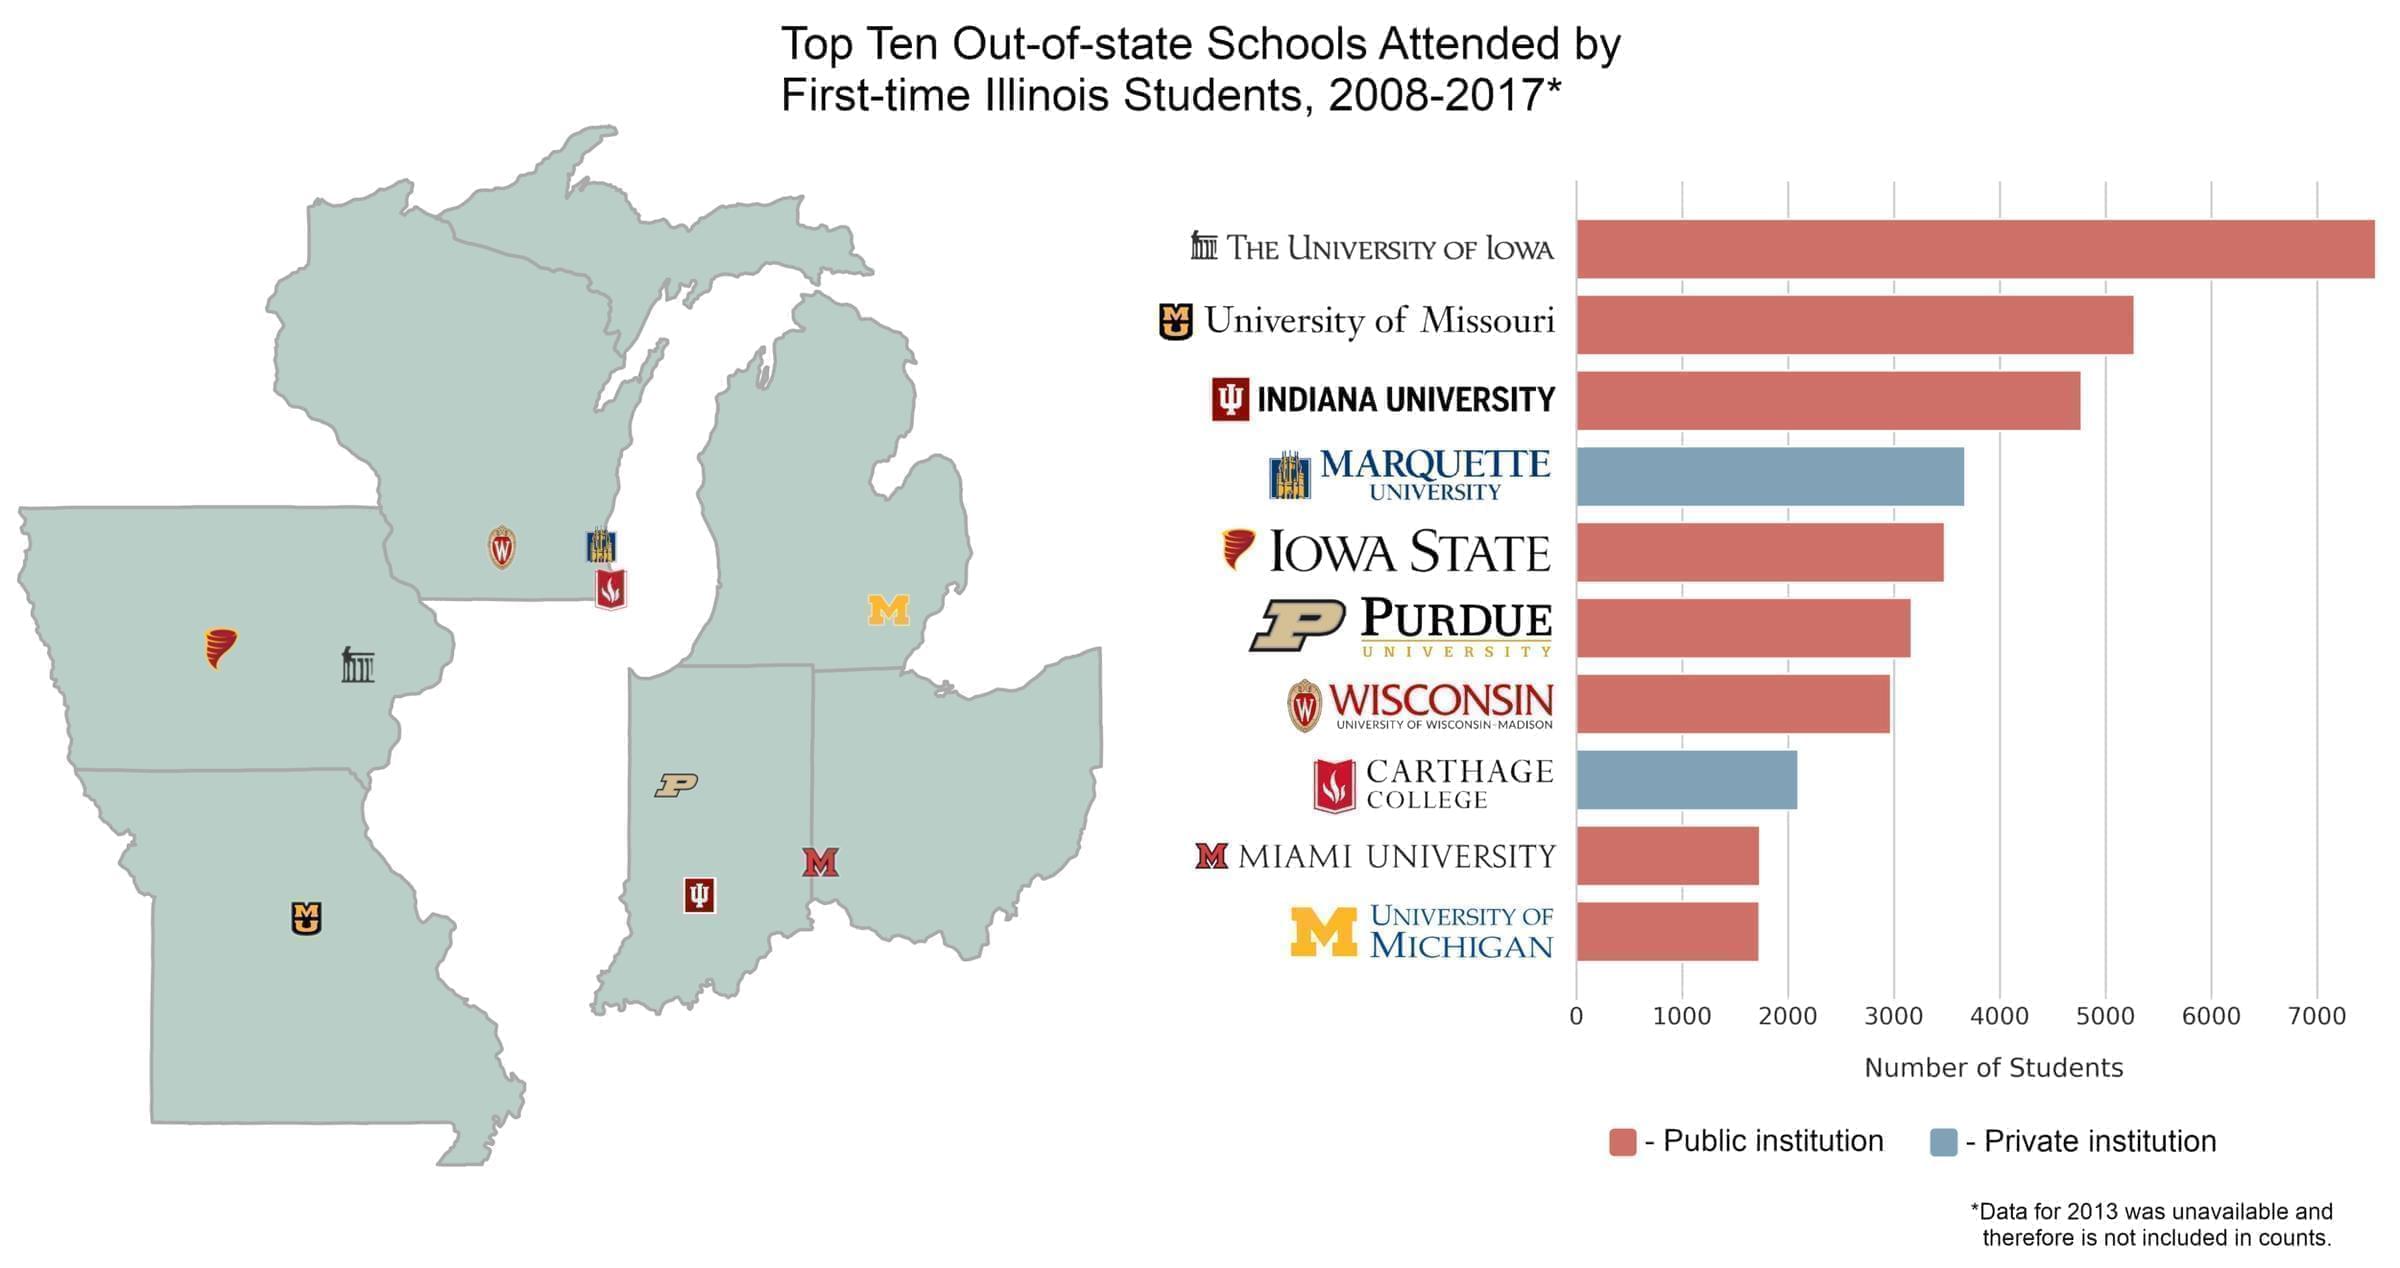 Data visualization using data from the Illinois State Board of Higher Education.